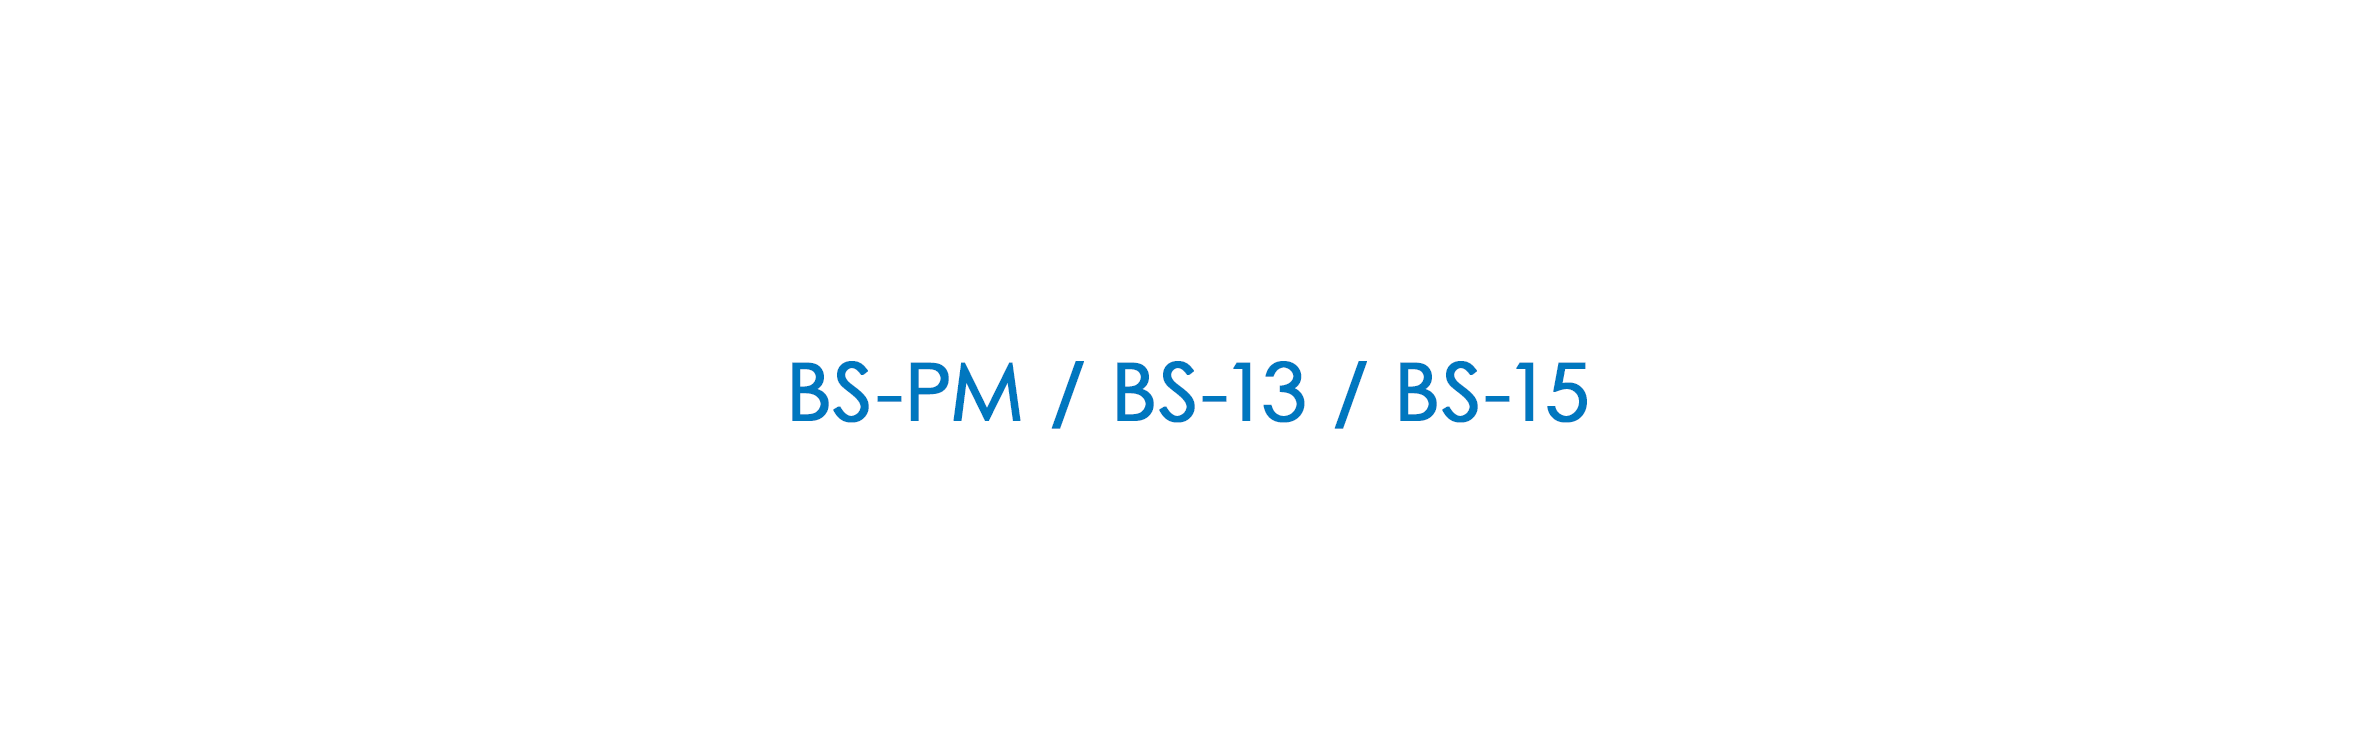 BS-PM / BS-13 / BS-15